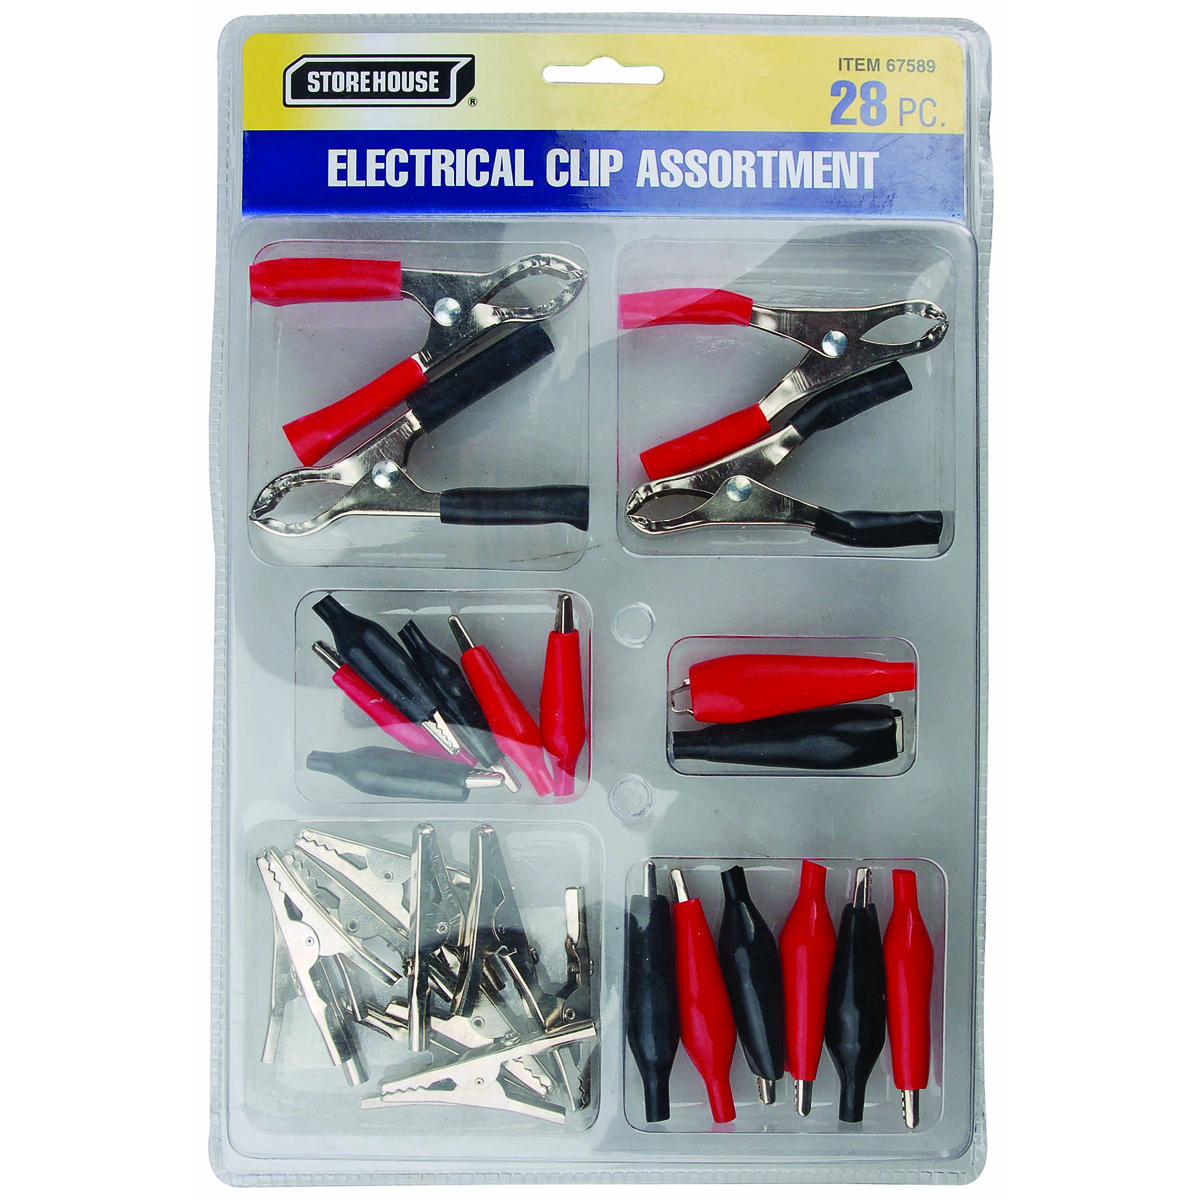 STOREHOUSE Electrical Clip Set 28 Pc. - Item 67589